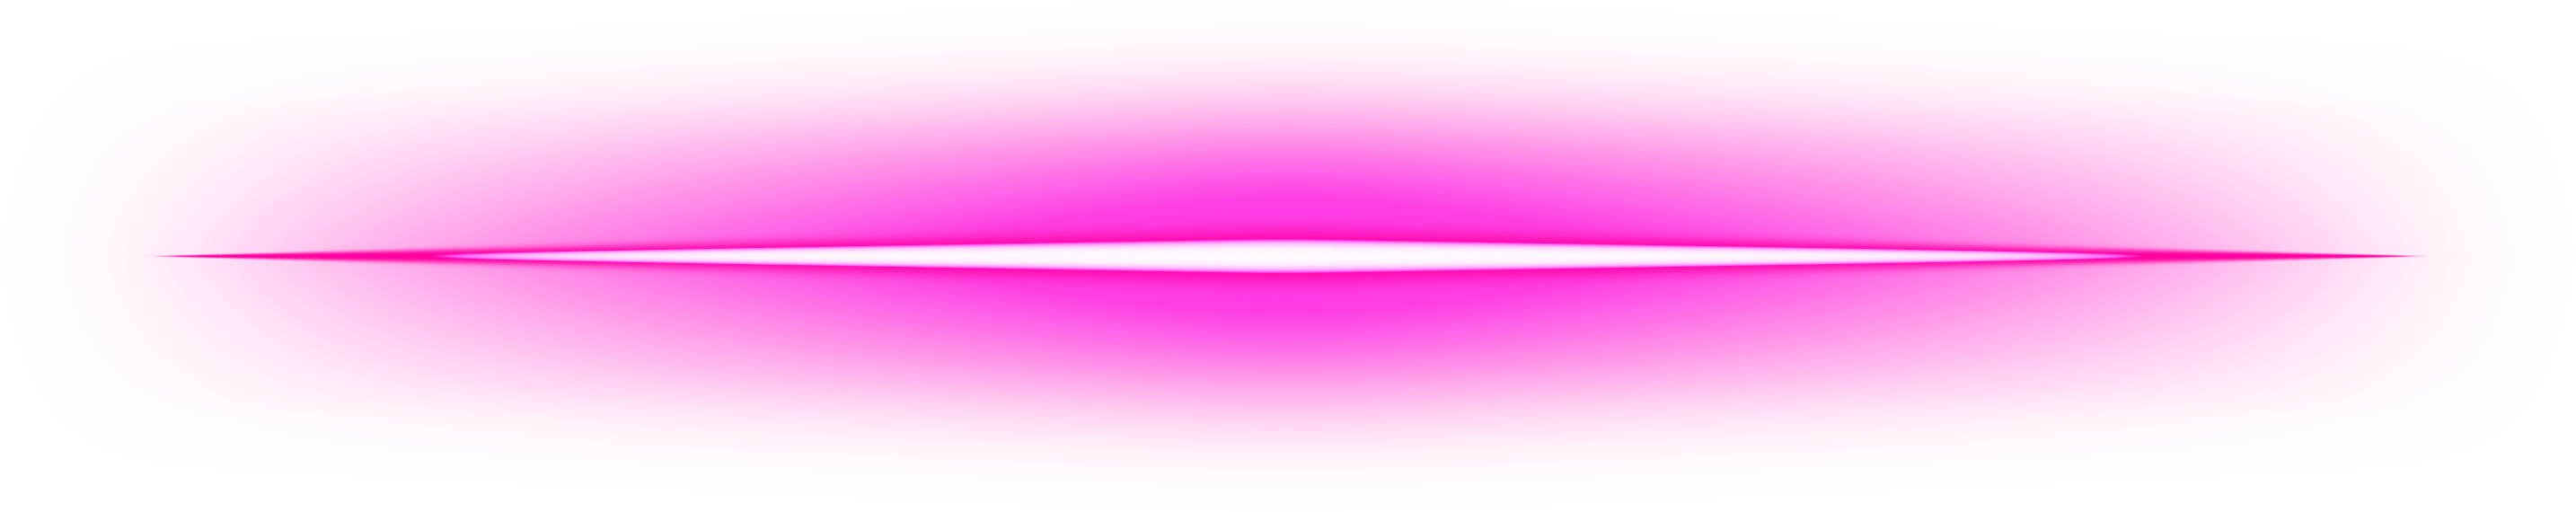 Glowing Pink Neon Line